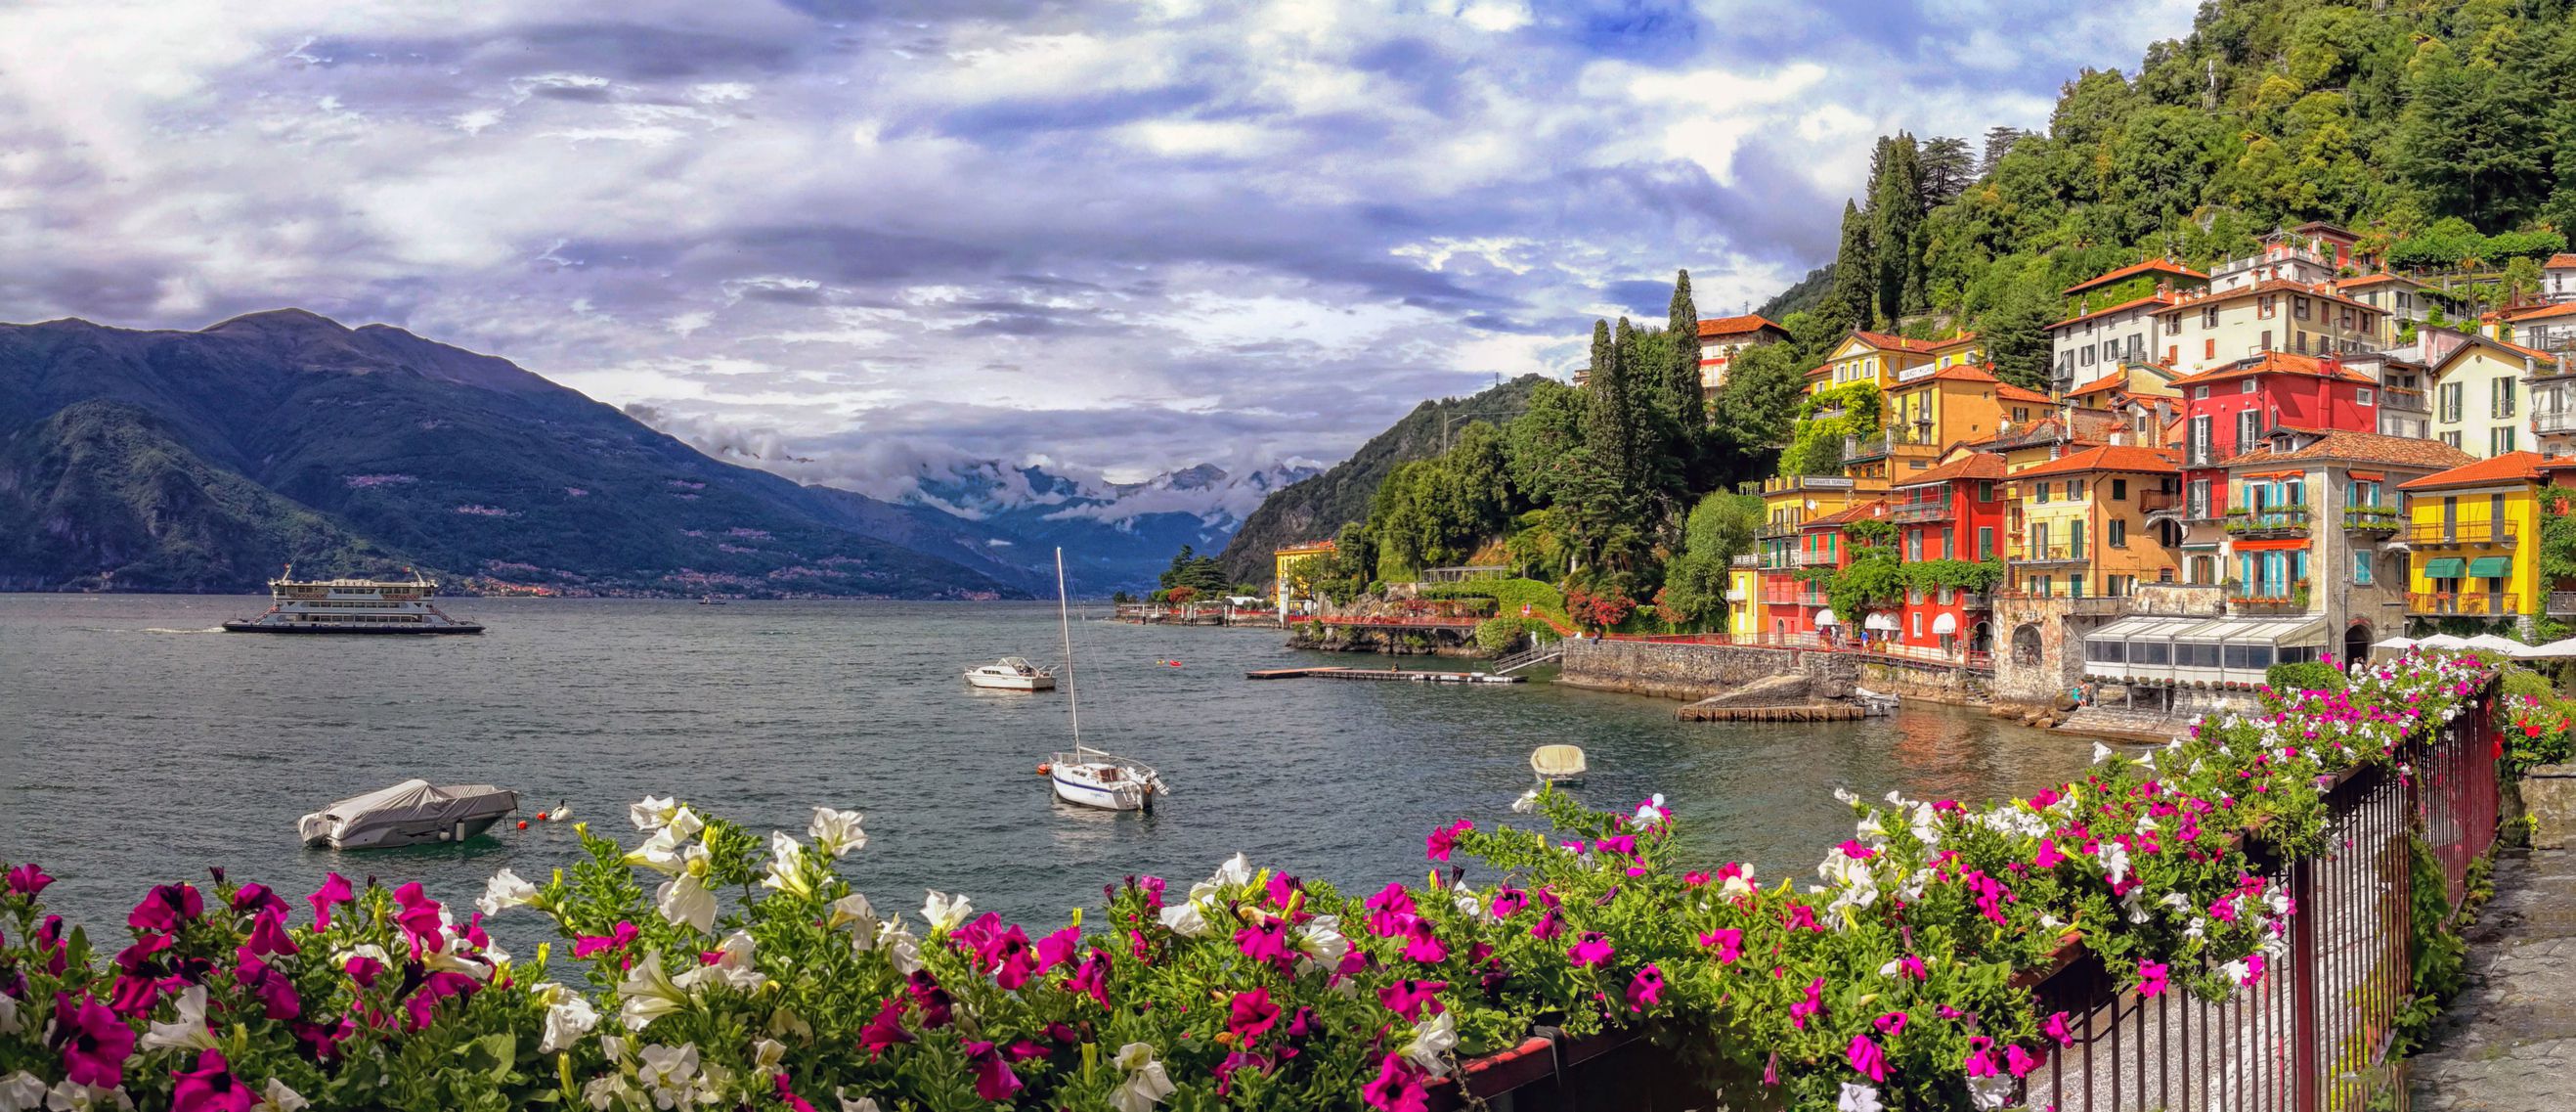 The 9 Best Lake Como Hotels Of 2020